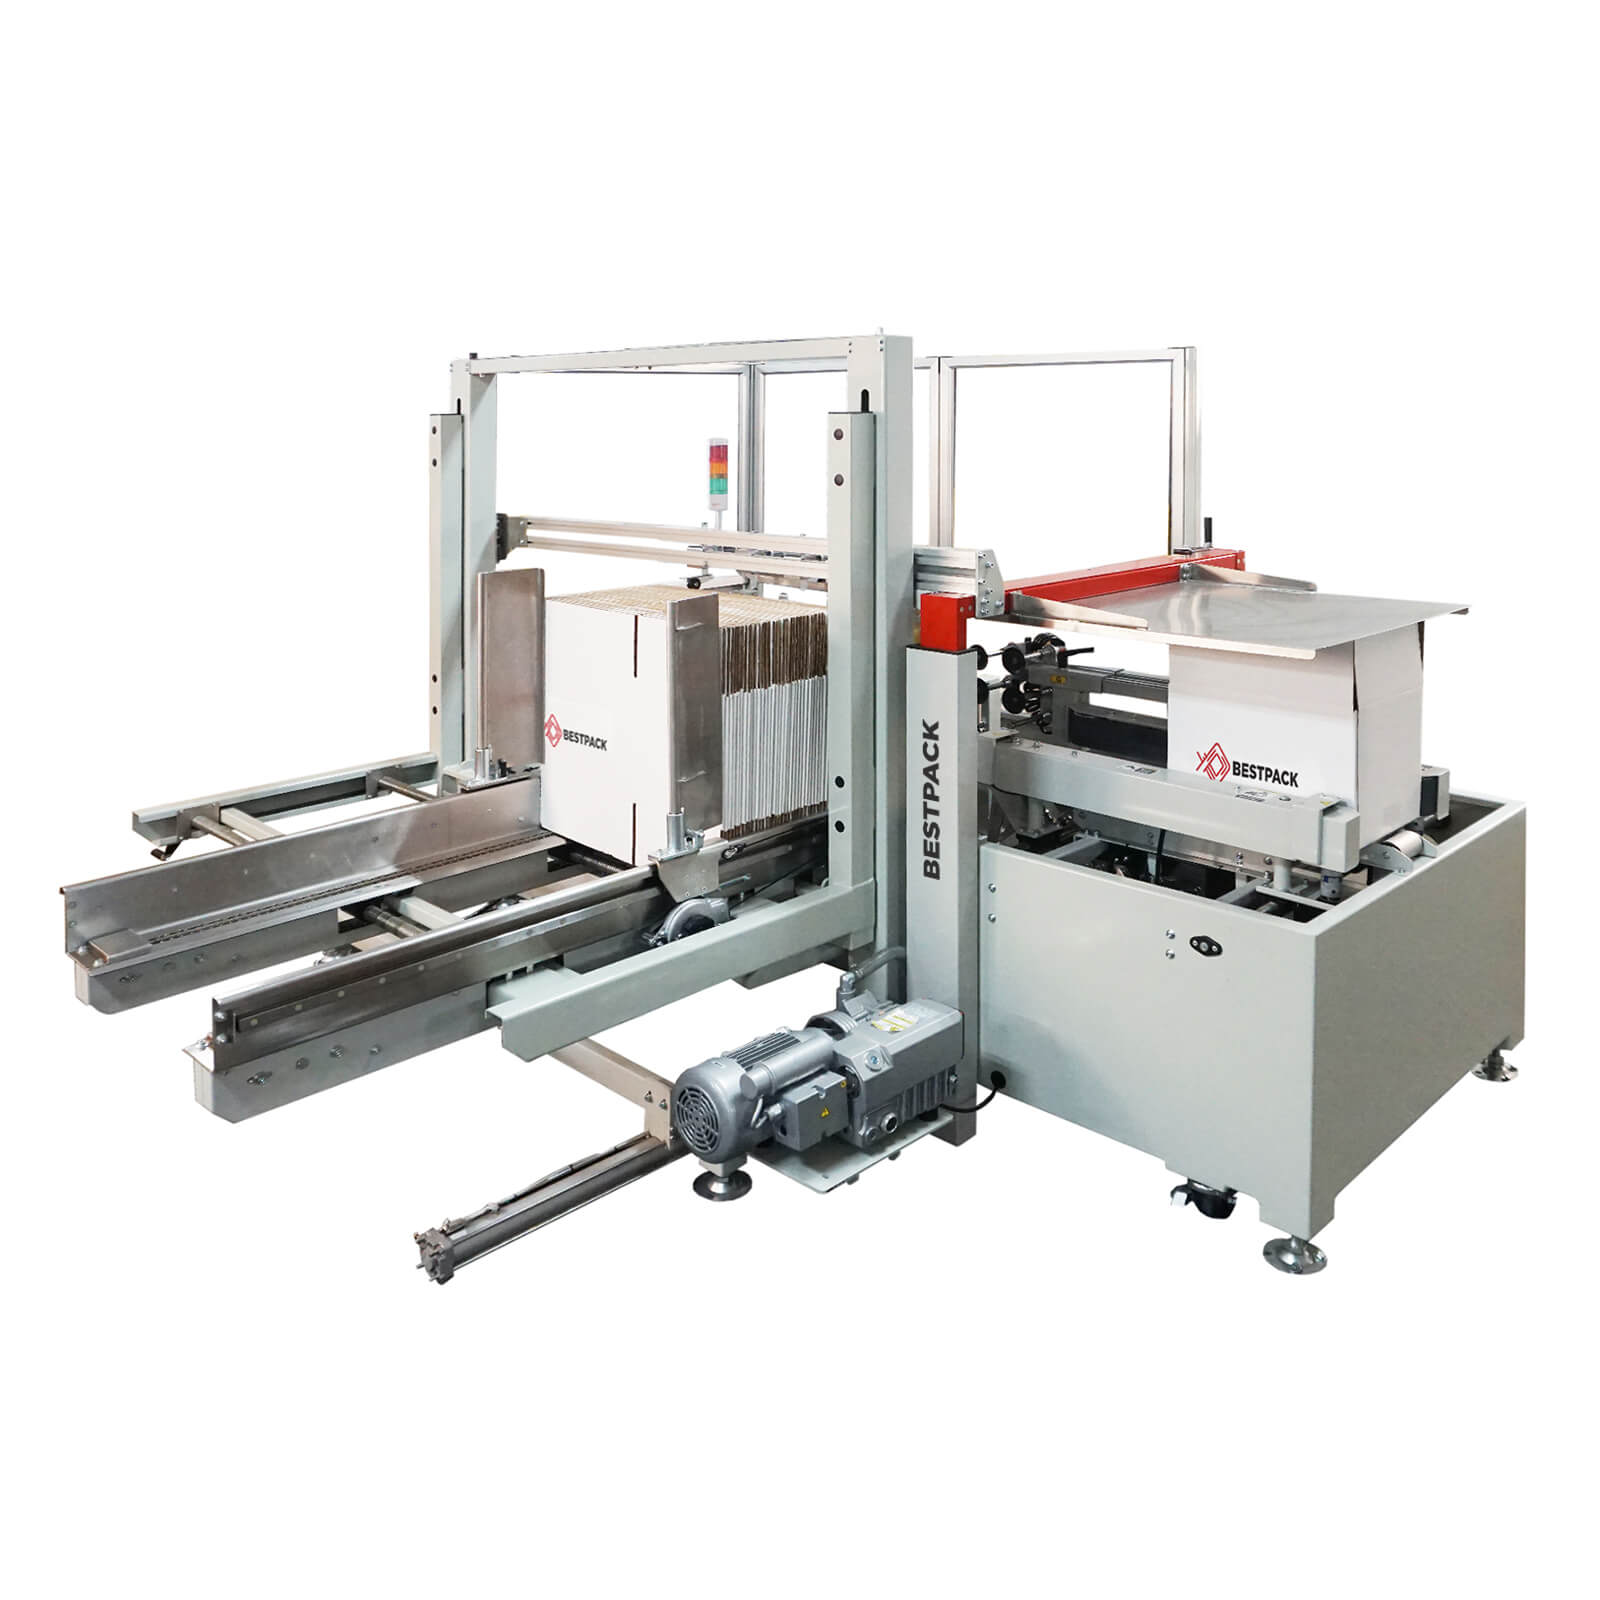 The ELVS carton erector systems from BestPack